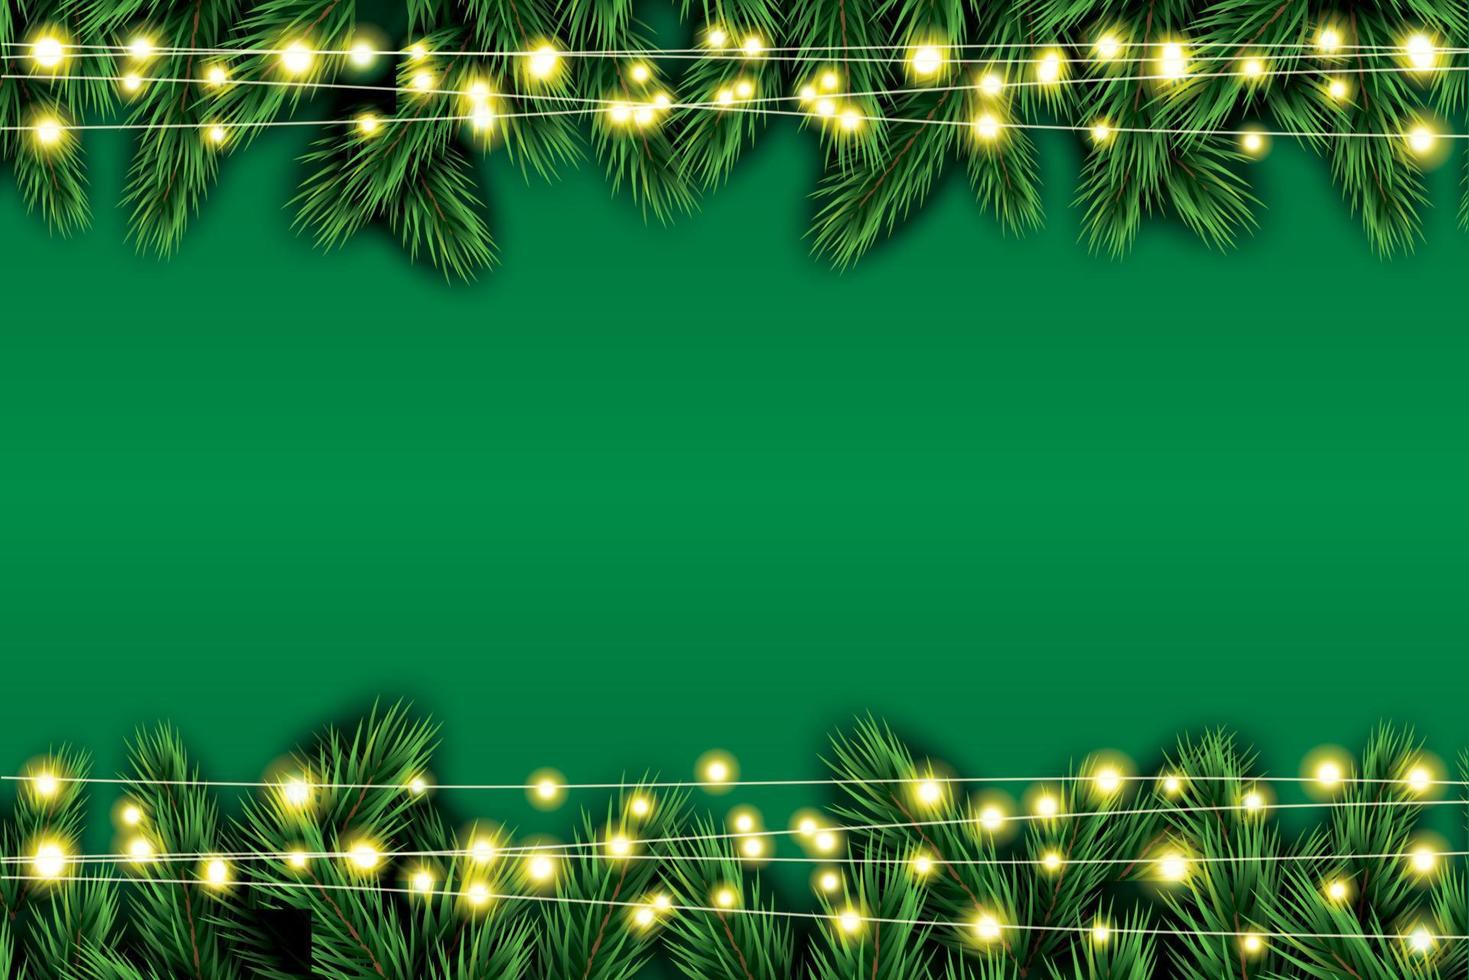 Fir Branch with Neon Lights on Green Background. vector